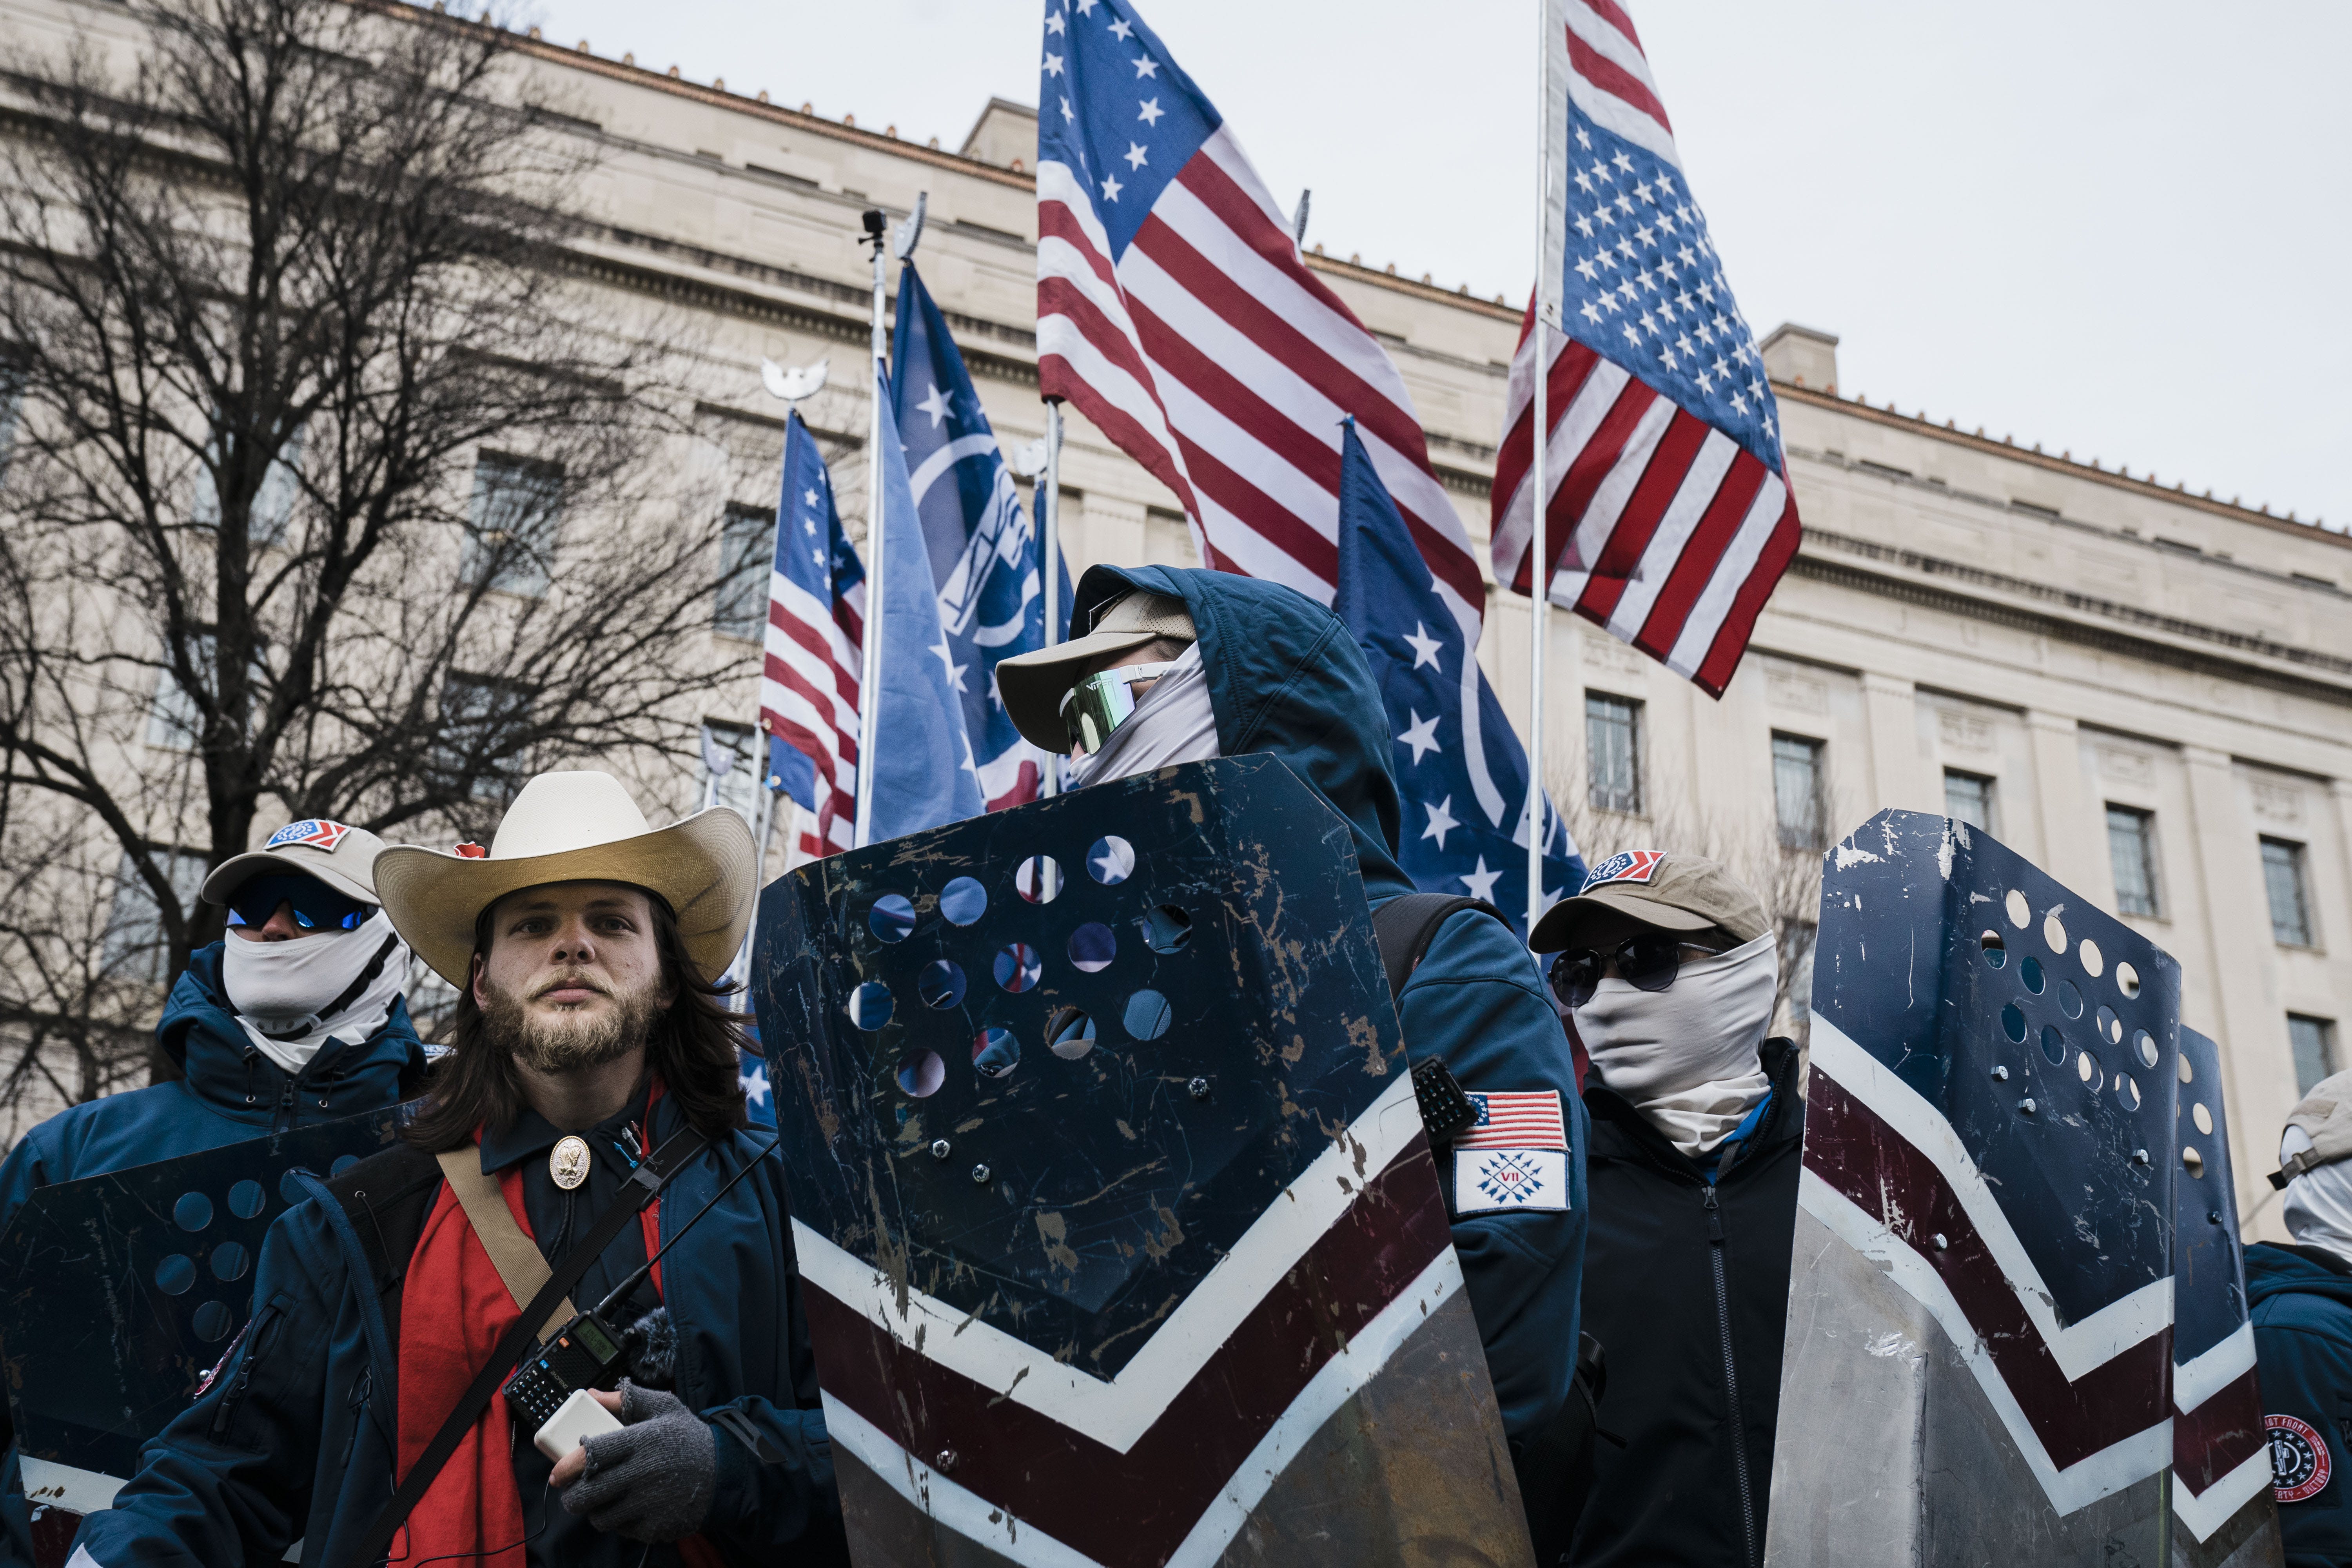 WASHINGTON, DC - JANUARY 21: Members of the right-wing group, the Patriot Front, and their founder, Thomas Ryan Rousseau, second from left, prepare to march with anti-abortion activists during the 49th annual March for Life along Constitution Ave. on Friday, Jan. 21, 2022 in Washington, DC.  (Kent Nishimura / Los Angeles Times via Getty Images)